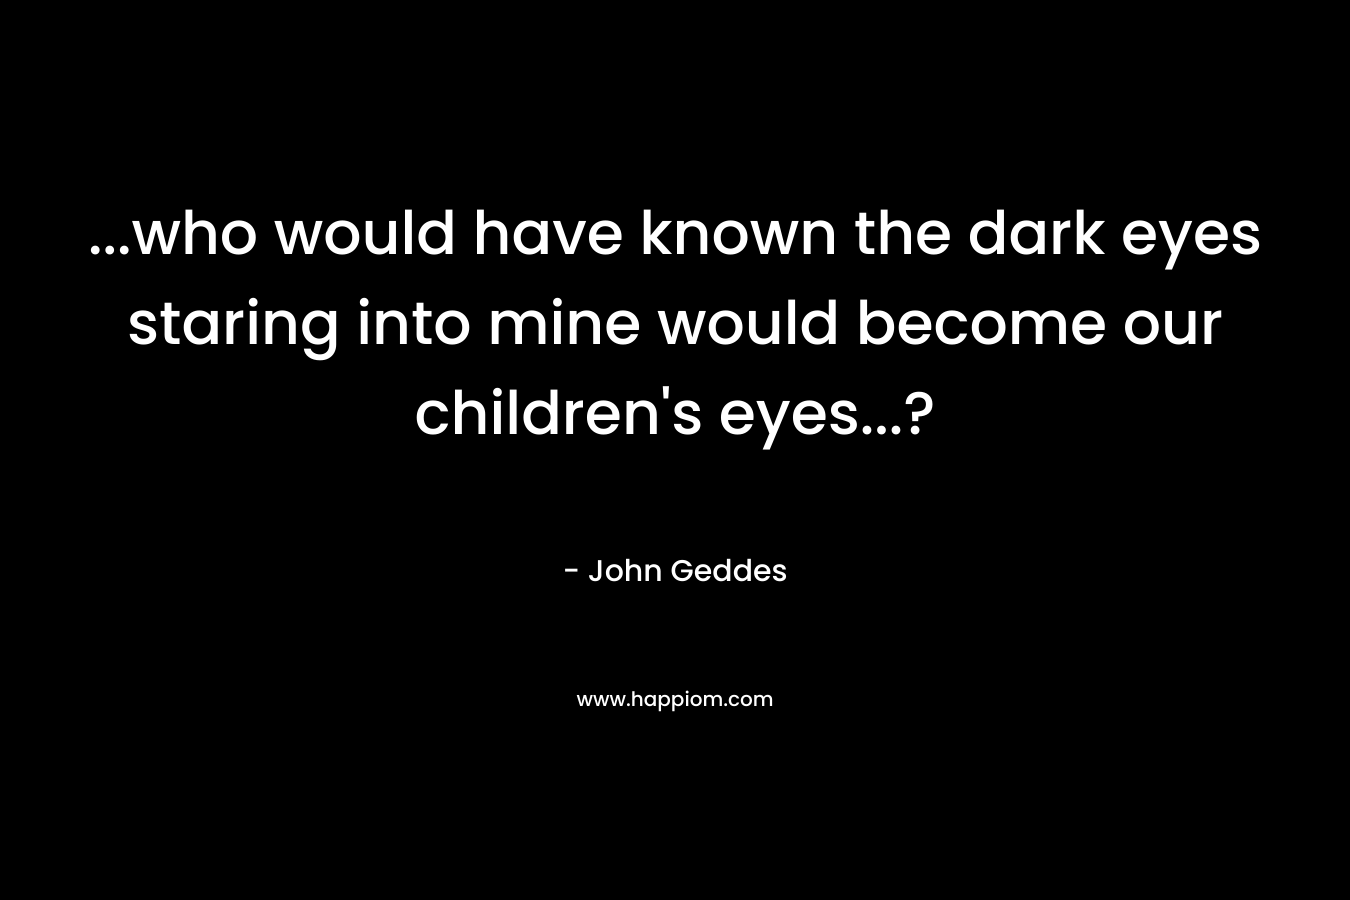 …who would have known the dark eyes staring into mine would become our children’s eyes…? – John Geddes